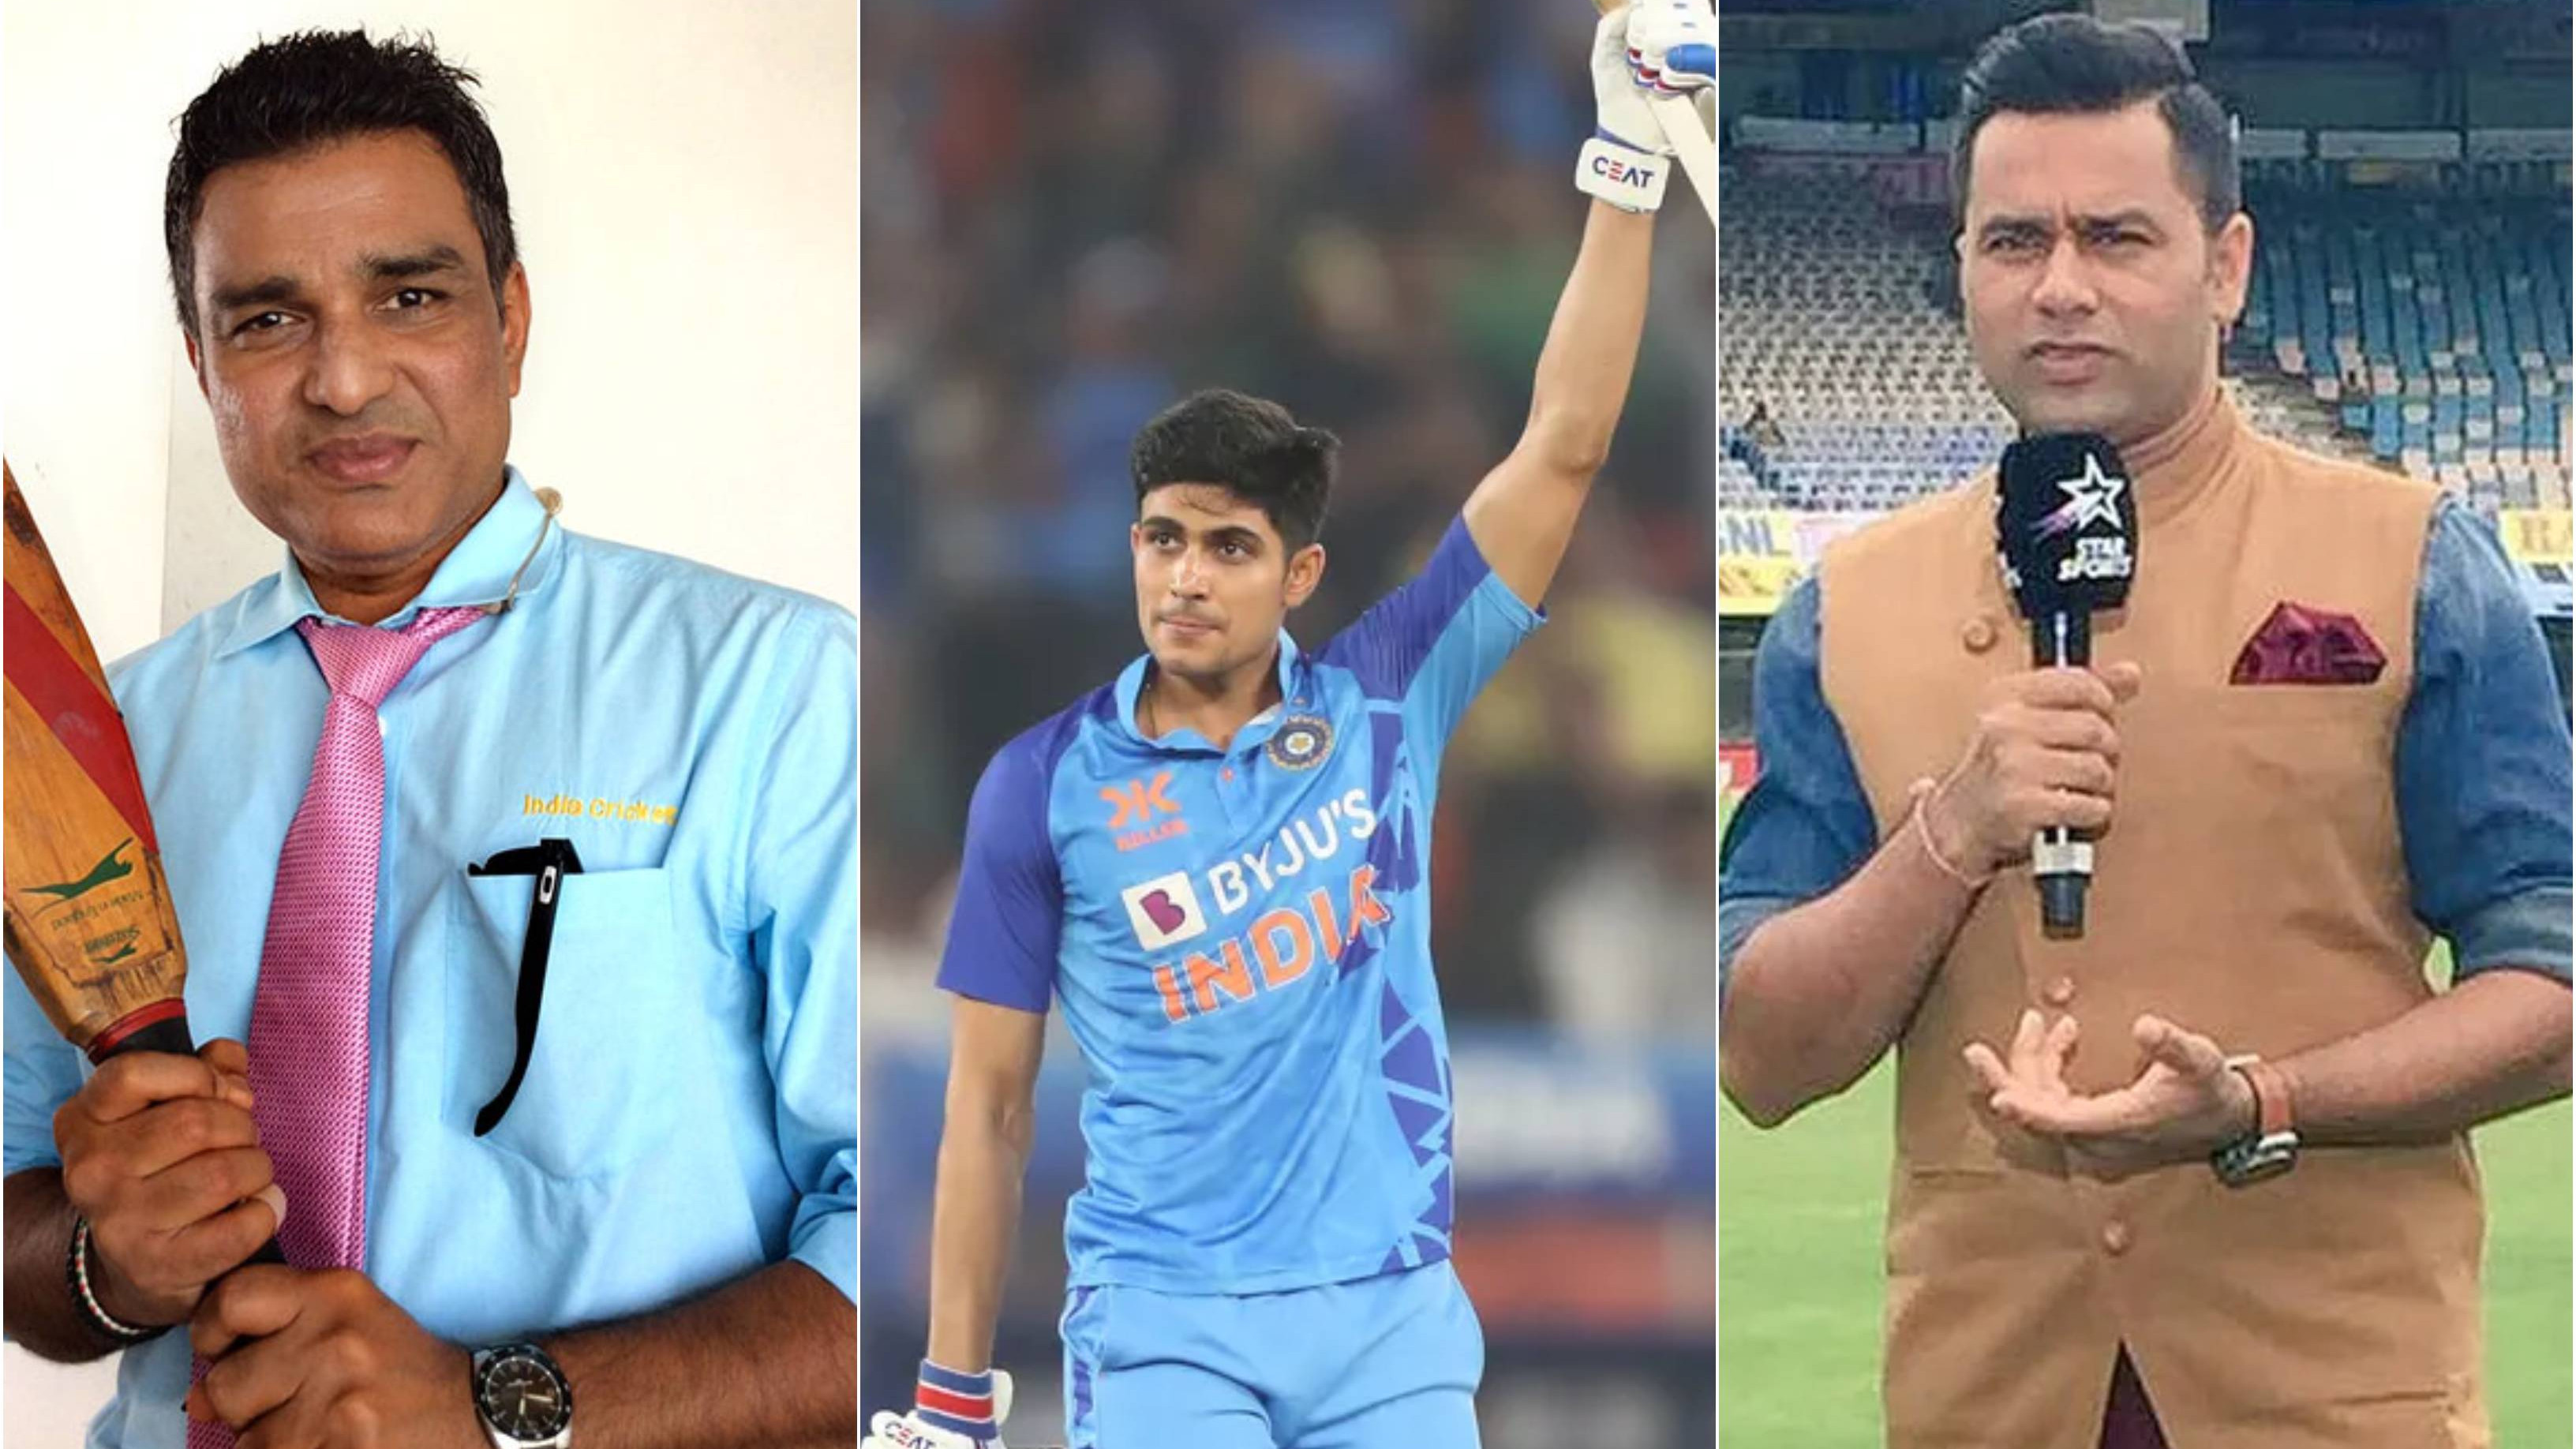 IND v NZ 2023: Cricket fraternity reacts in awe as Shubman Gill’s whirlwind 126* powers India to 234/4 in 3rd T20I